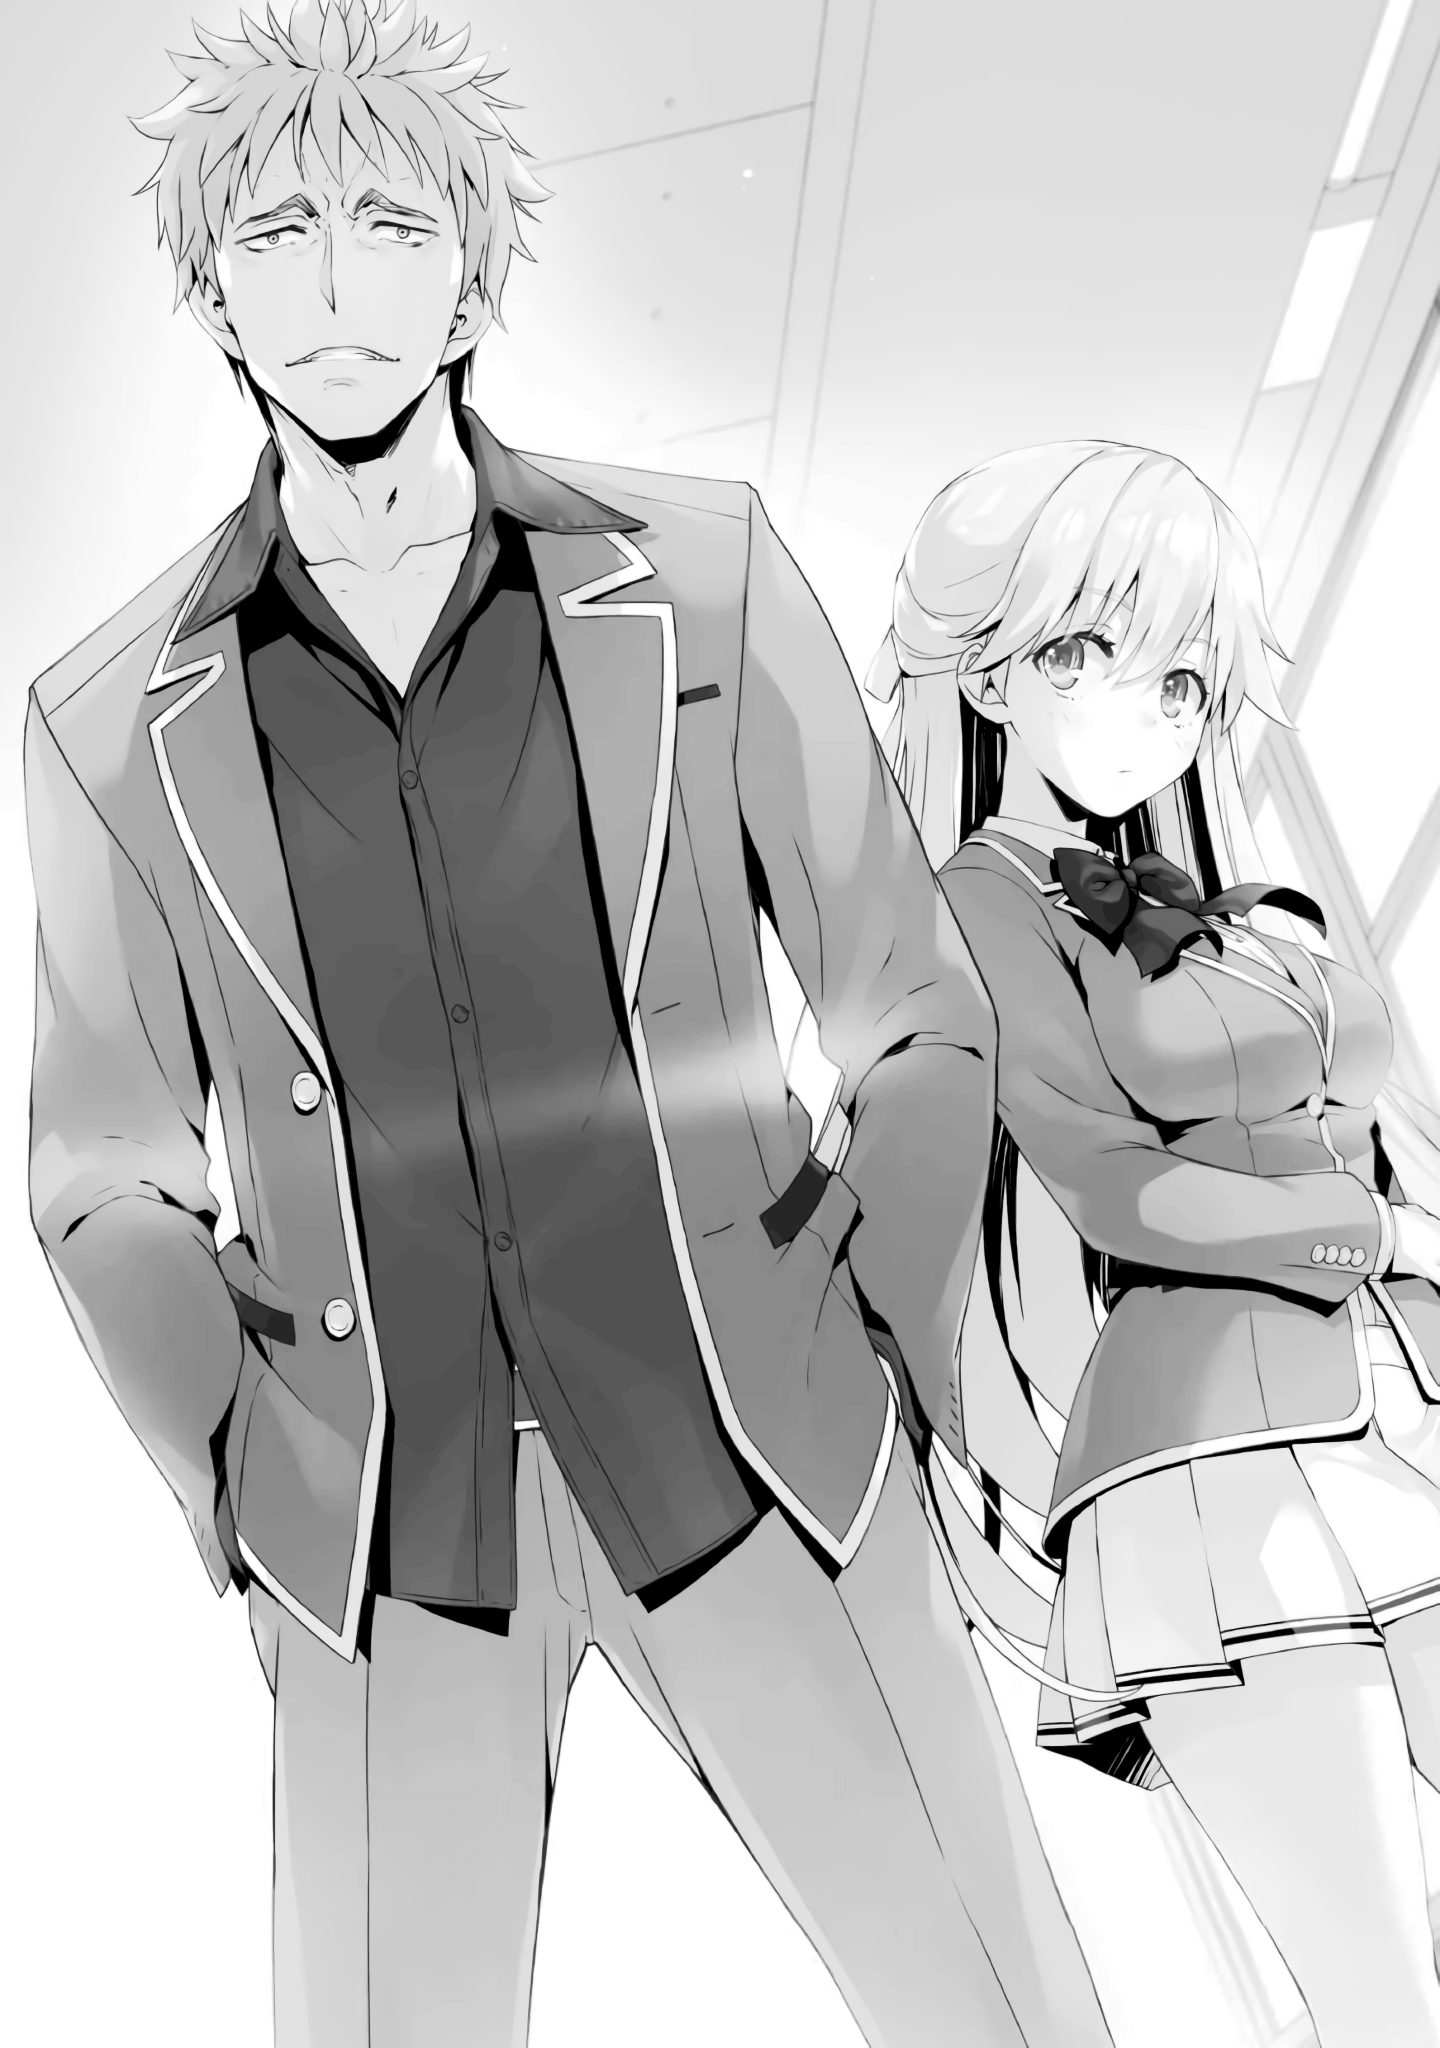 Classroom of the Elite Volume 12 Chapter 3 Part 2 TL: Graze/Hina/LiamED: Pu...